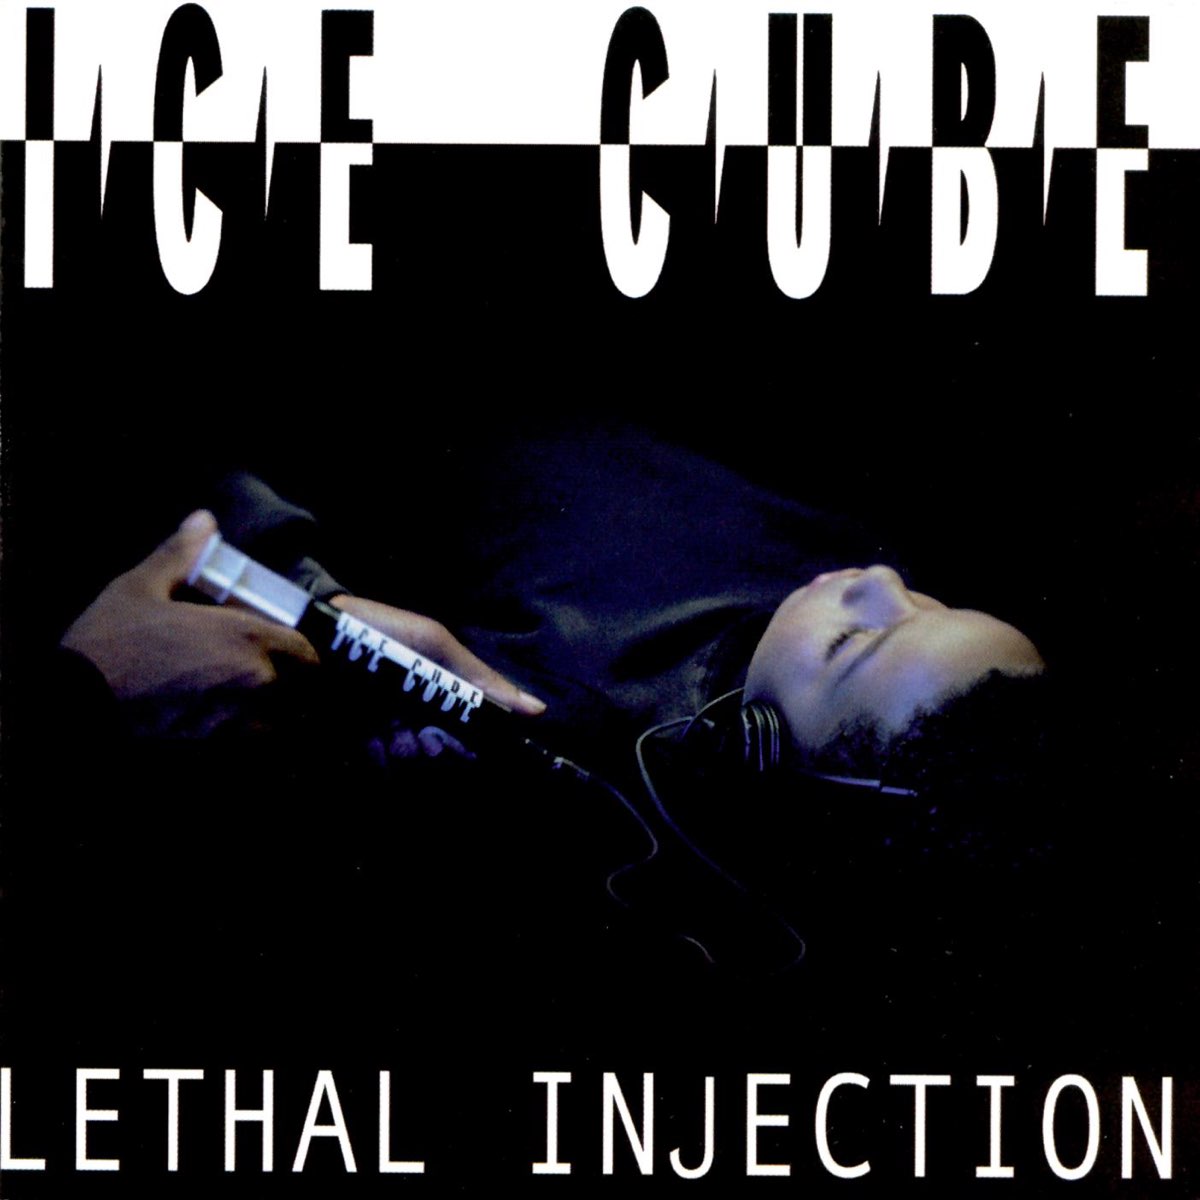 Ice cube you know. Ice Cube Lethal Injection 1993. Ice Cube Lethal Injection. Letal Injection Ice Cube. Ice Cube you know how we do.